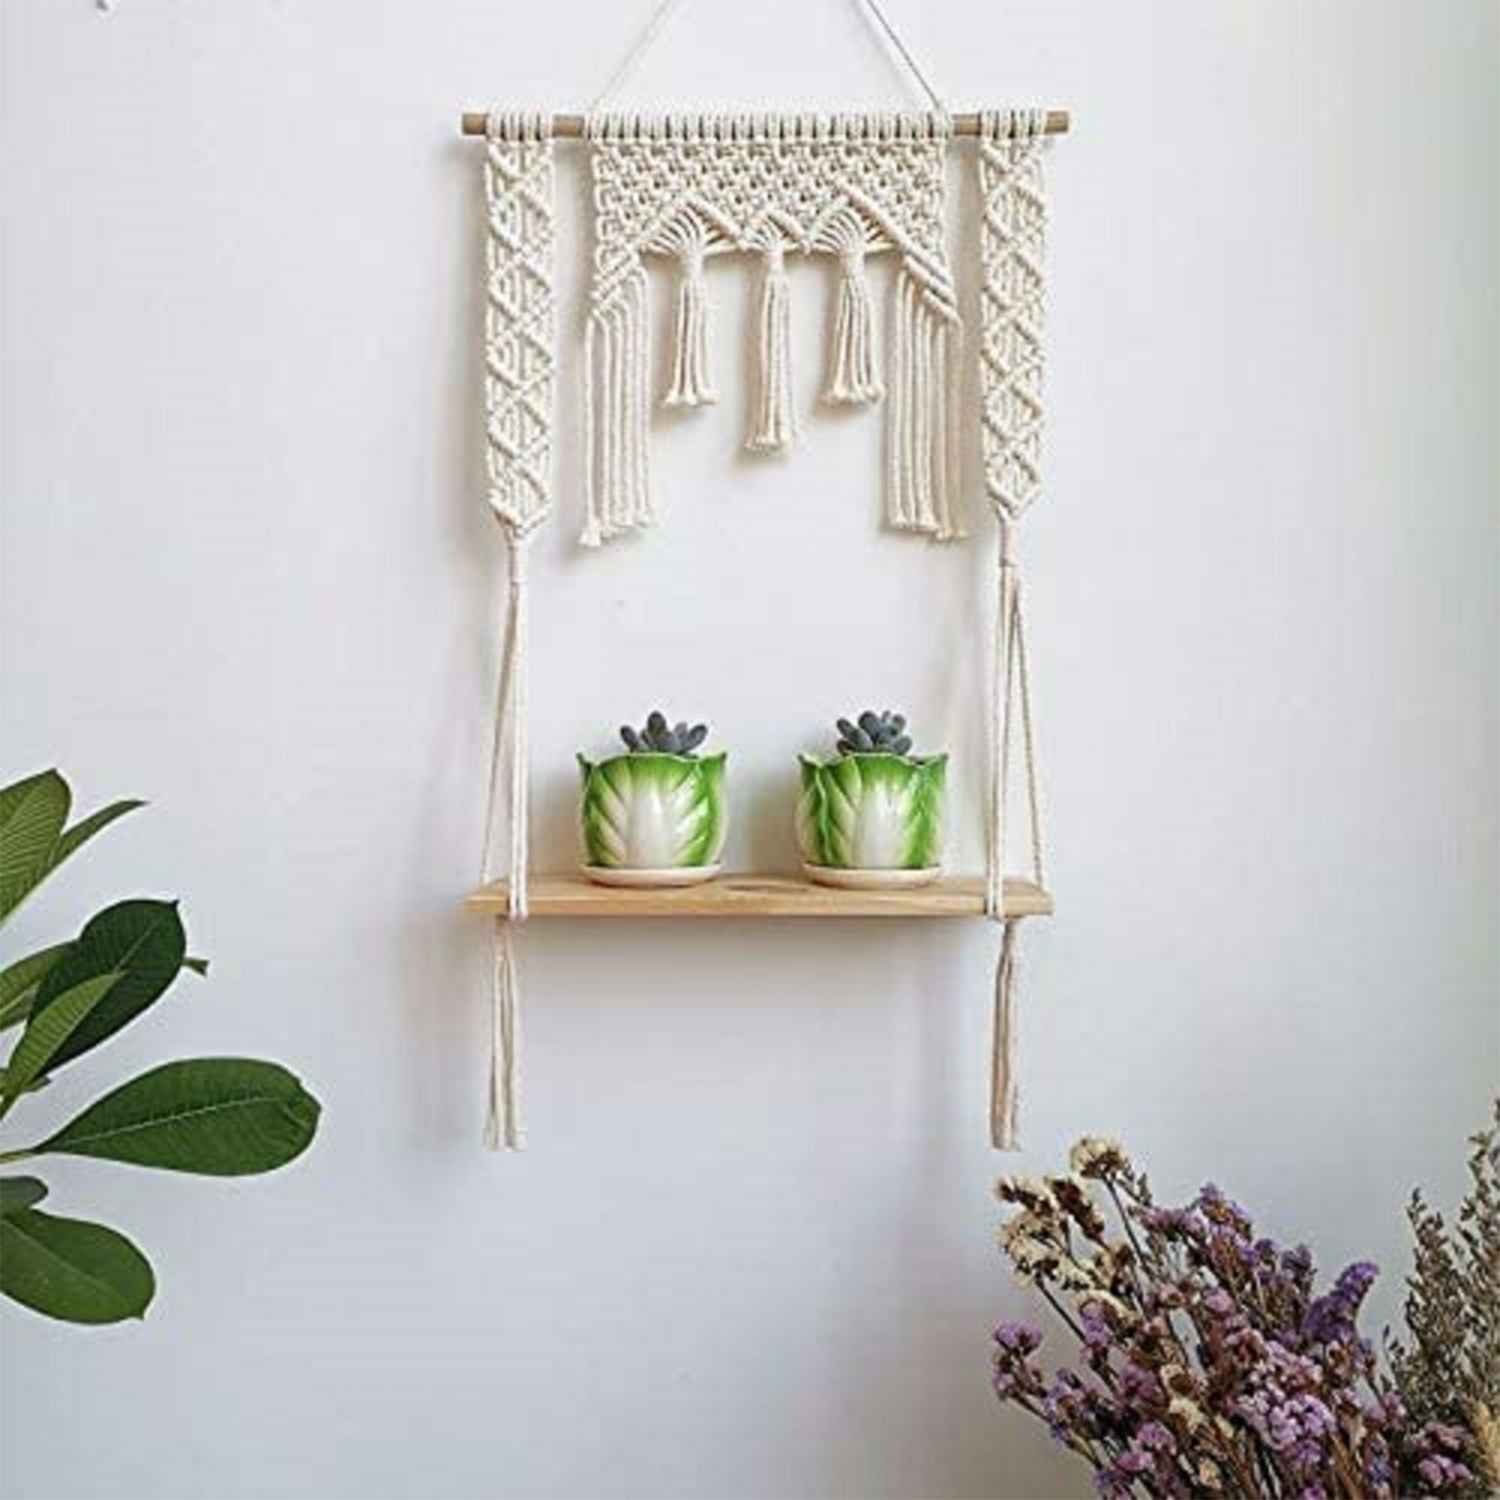 Kaahira Best Gift Handwoven Swing in Off White